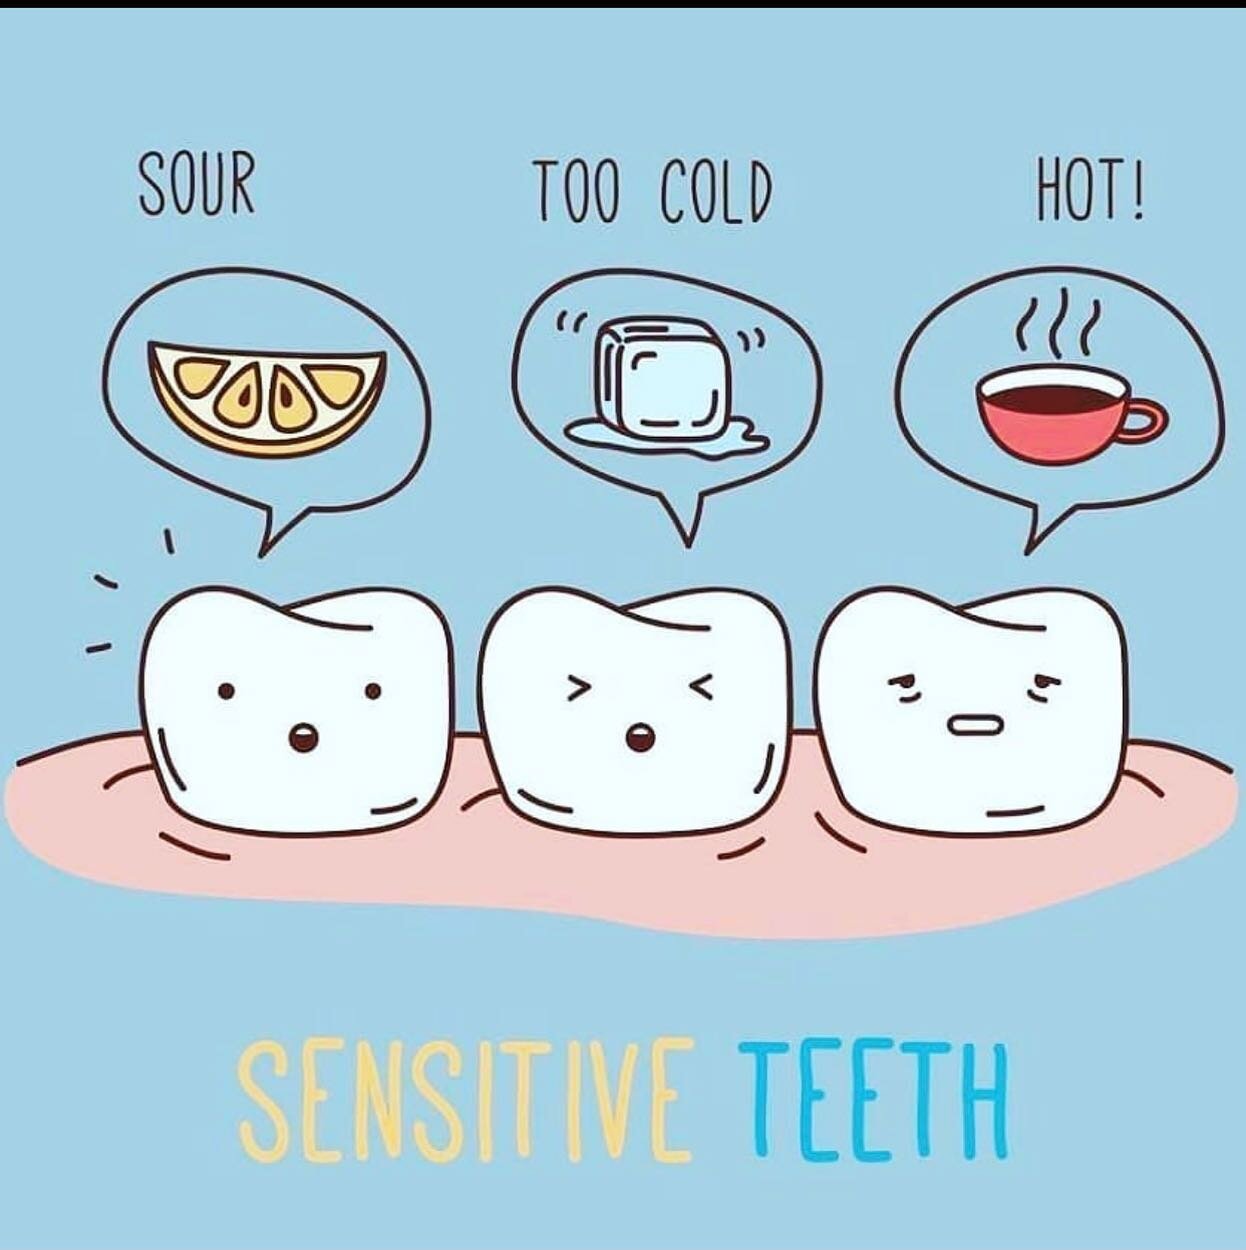 What causes teeth to be sensitive? 

There are many reasons this can occur. The most common reasons are from things such as gum recession or decay, but other factors such as worn enamel, enamel erosion, and clenching and grinding can also cause sensi